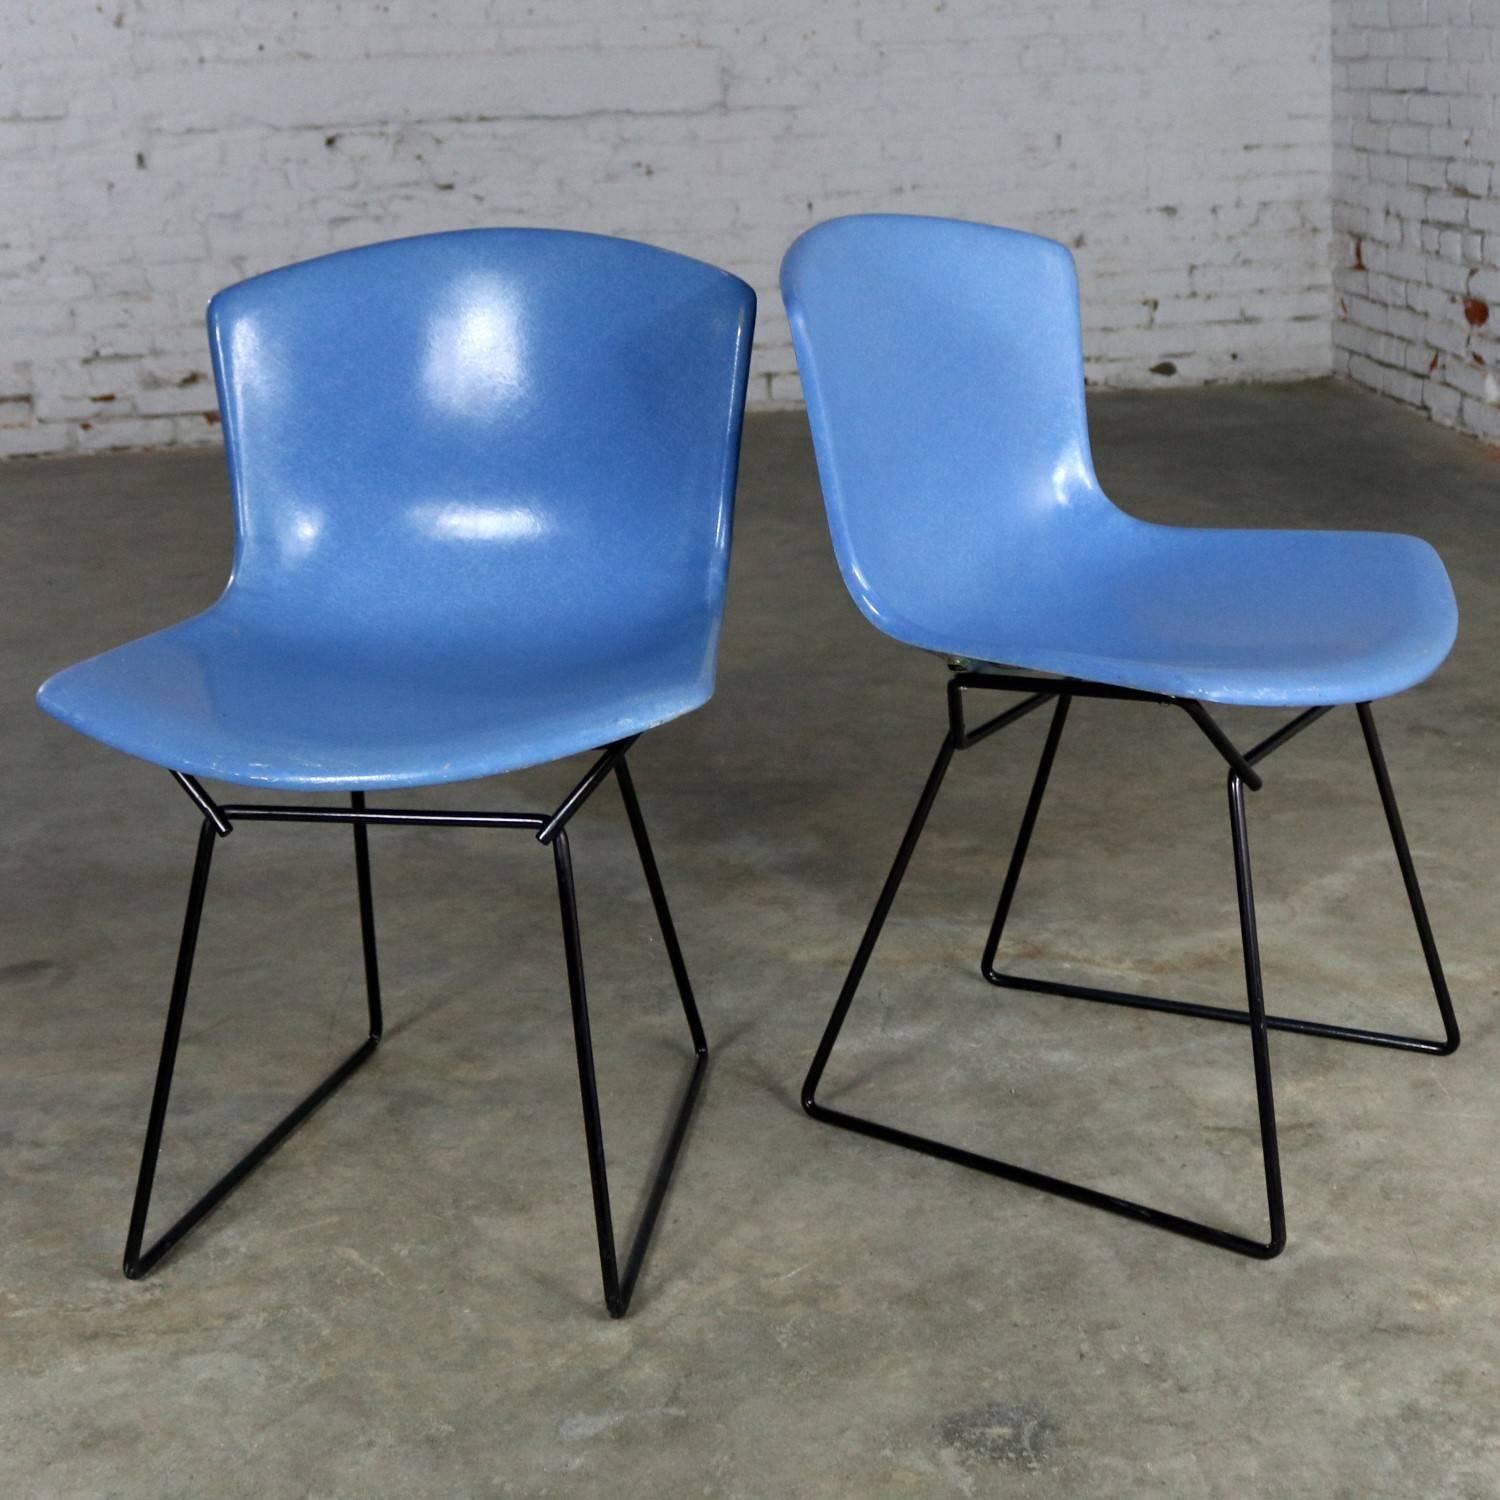 Handsome pair of Knoll Associates hard shell fiberglass side chairs by Harry Bertoia. These two are royal blue with a black wire base and retain their original tags. They are over-all in wonderful vintage condition. The shells are what we would